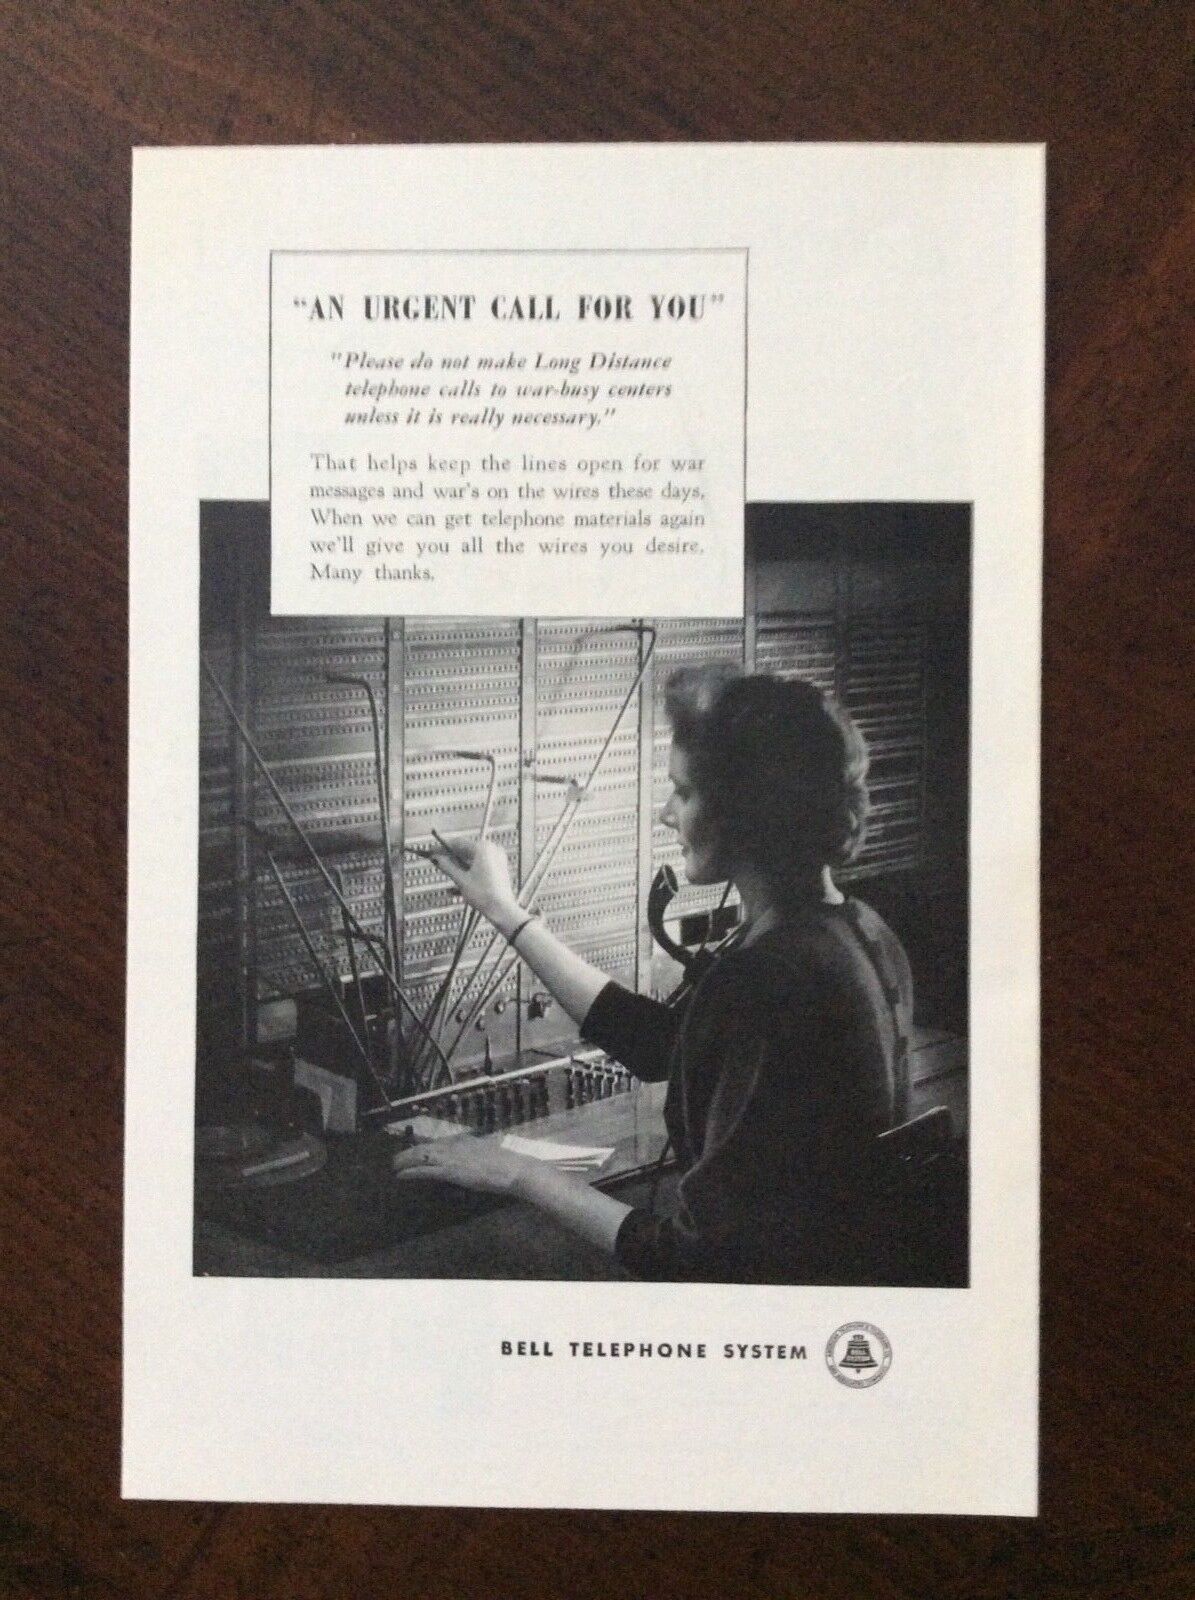 1943 vintage original ad Bell Telephone System “An Urgent Call For You”